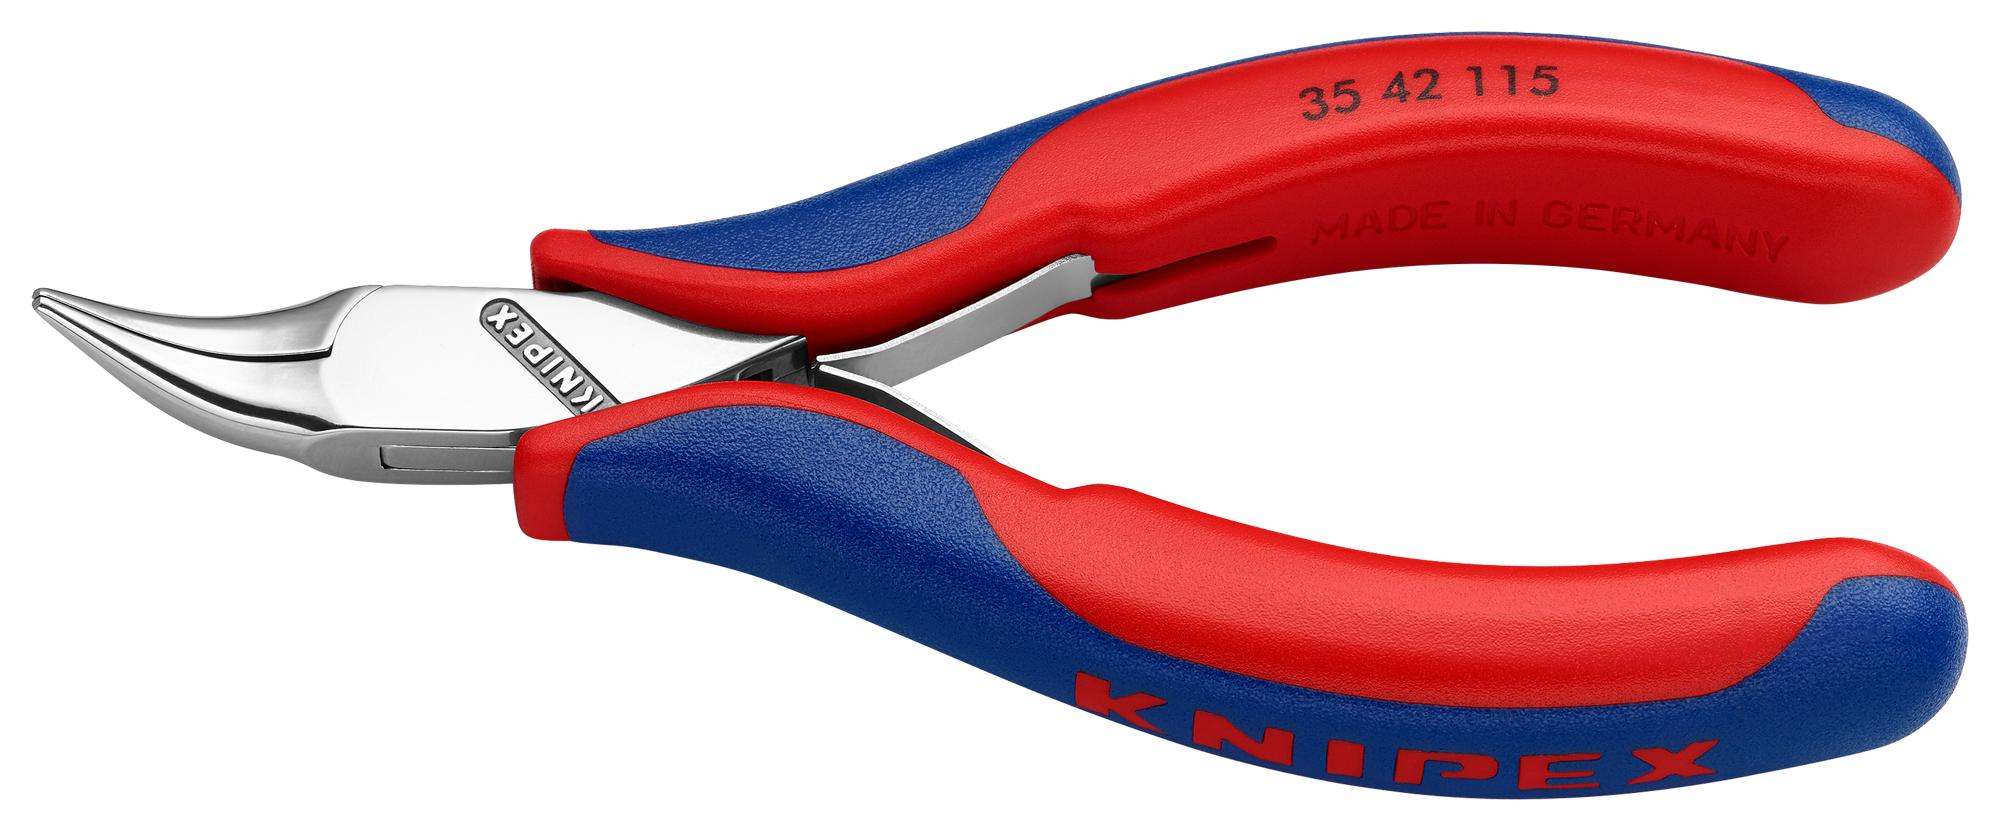 Knipex 35 42 115 Relay Adjusting Pliers